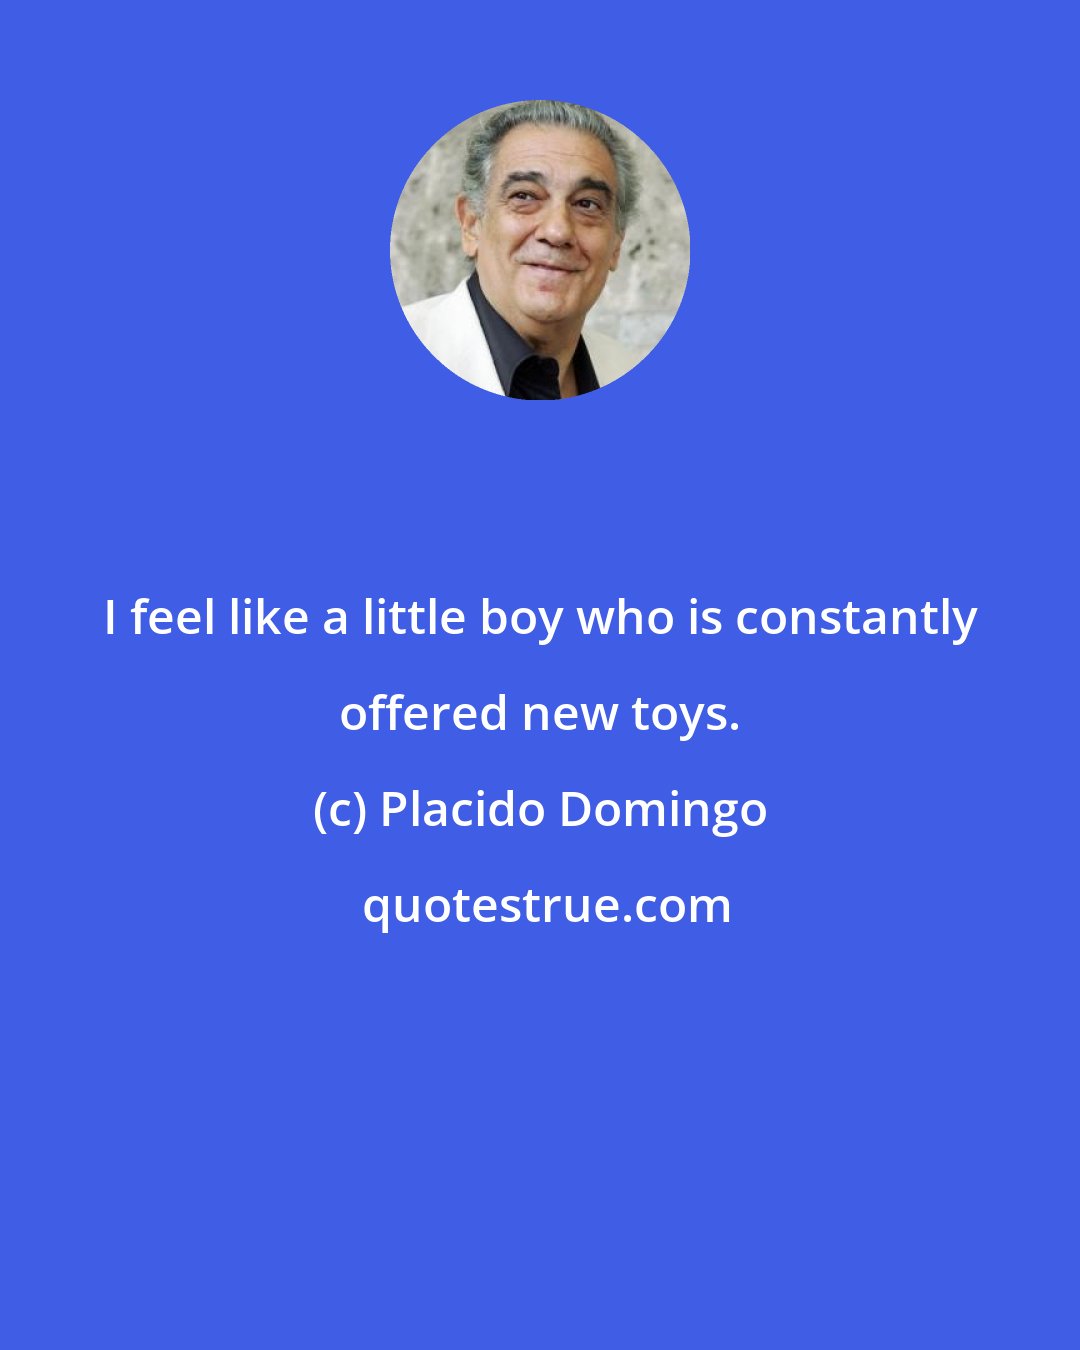 Placido Domingo: I feel like a little boy who is constantly offered new toys.